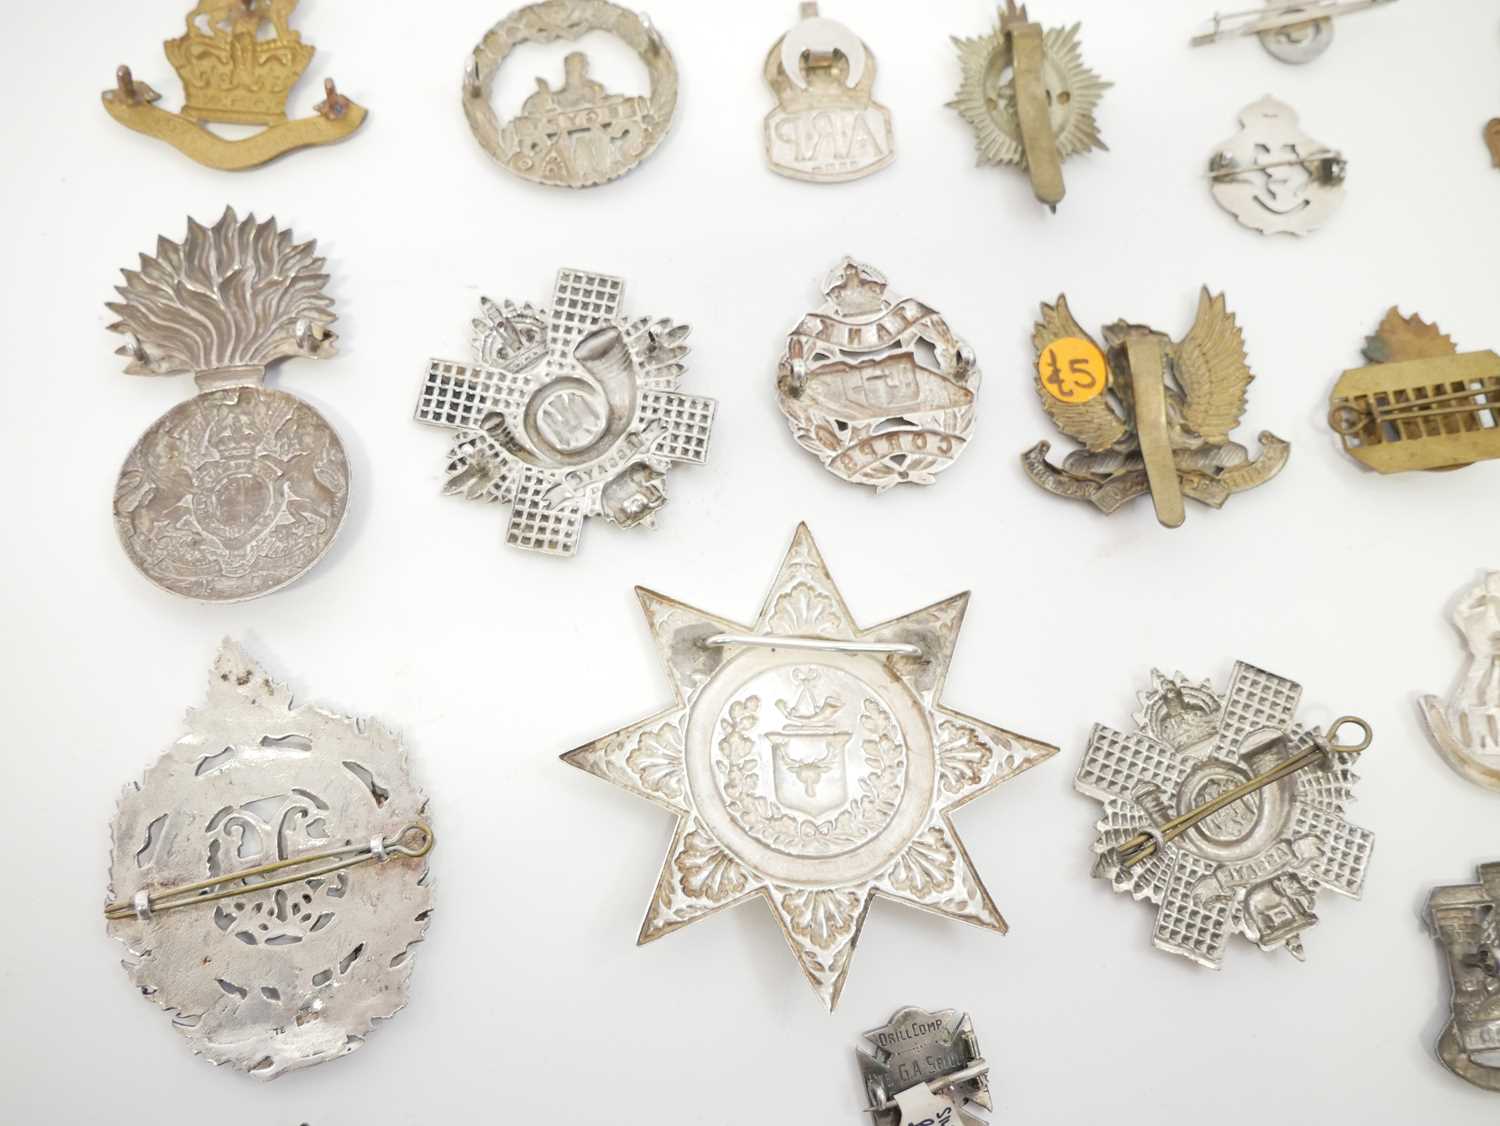 Twenty six British Army cap badges and Scottish clan badges, ten of which are Sterling silver. - Image 20 of 23